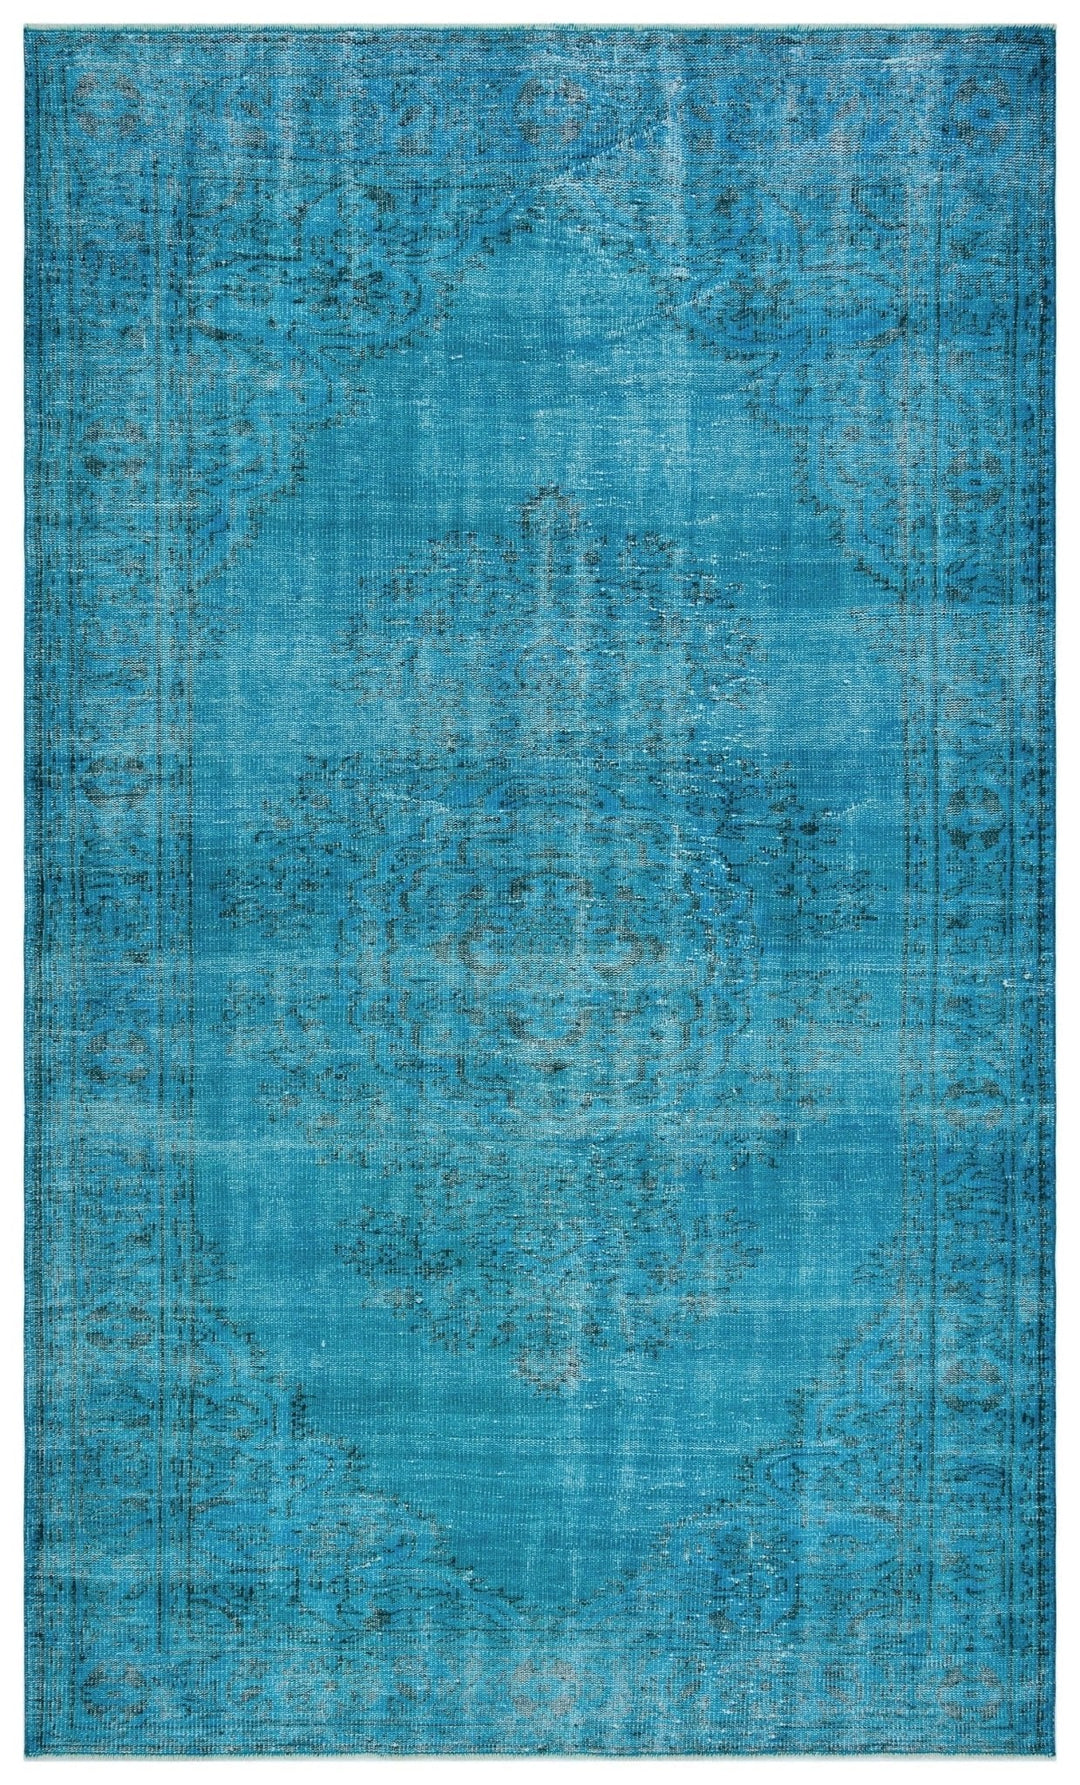 Athens 28509 Turquoise Tumbled Wool Hand Woven Carpet 185 x 313